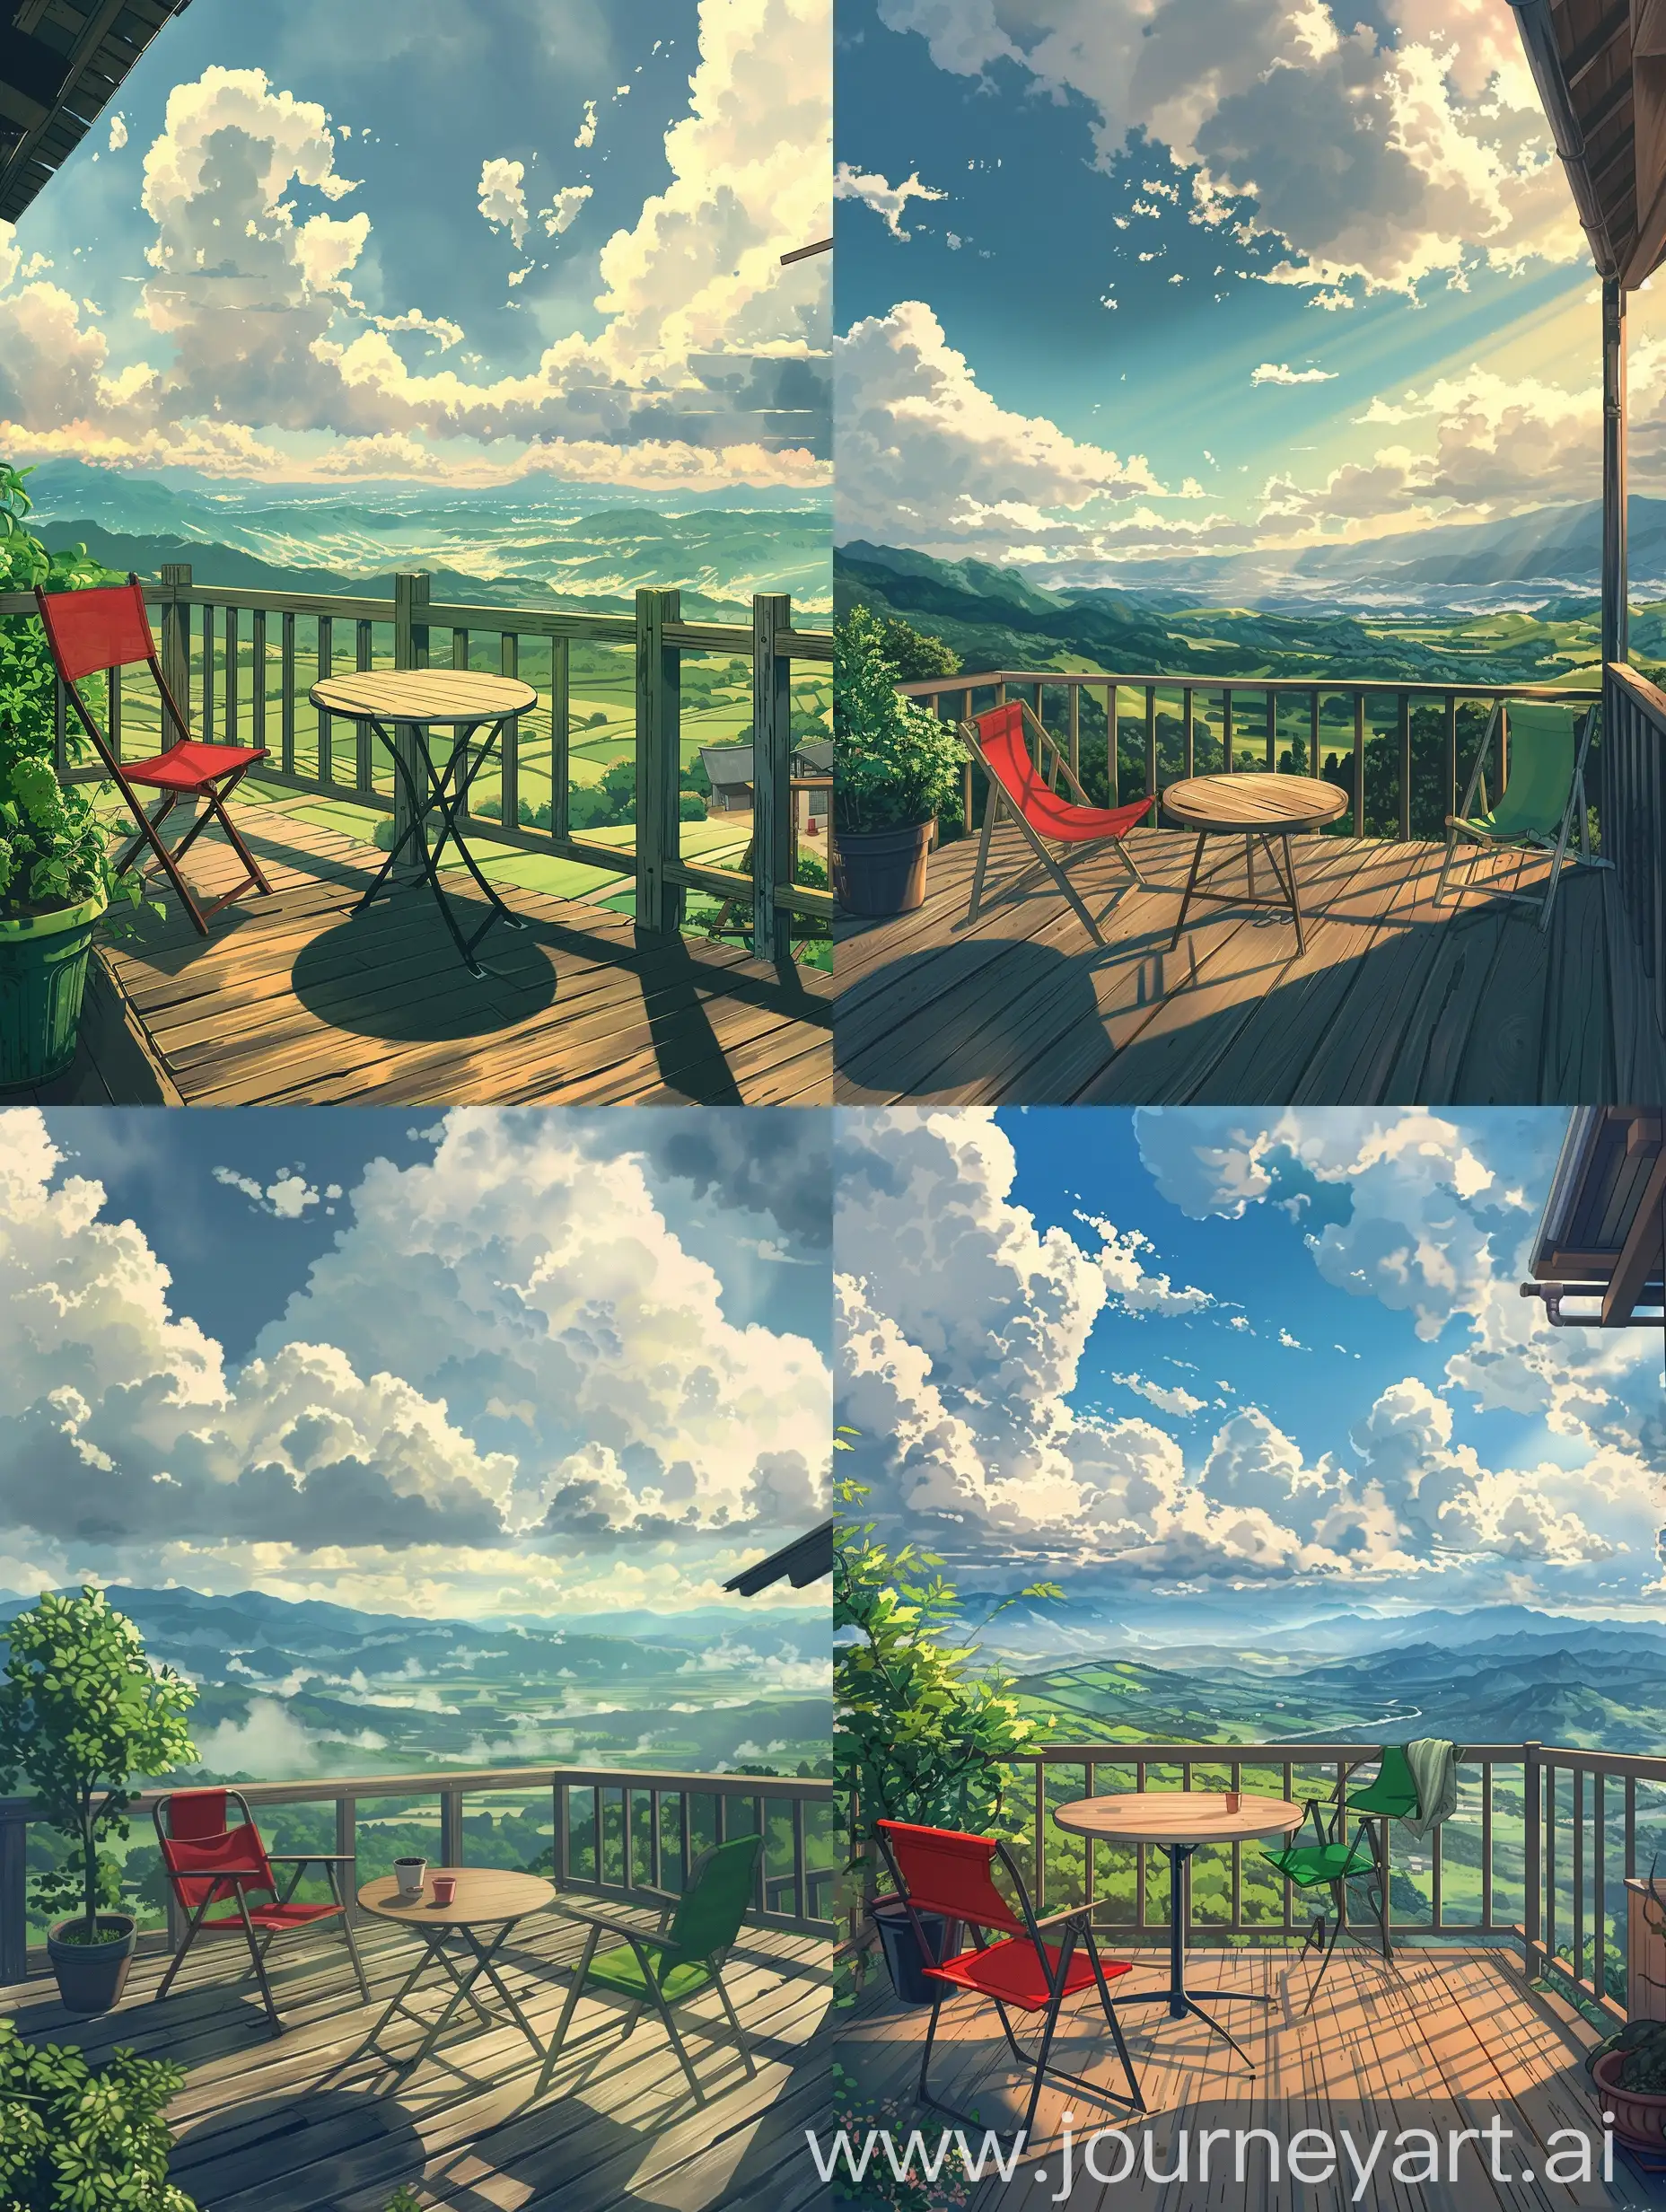 Beautiful anime style,Makato shinkai style and a mix of Studio Ghibli 1.3 style, a tranquil scenery, featuring a wooden deck with a small, round table and two folding chairs, one red and one green, inviting relaxation. A potted plant adds a touch of greenery to the left side, complementing the vast, lush landscape that stretches out beyond the deck’s railing. Rolling hills undulate into the distance where mountains rise against a backdrop of soft clouds, while natural light enhances the scene, casting shadows and creating highlights that give depth to the view. To the right, a glimpse of another structure suggests this peaceful retreat is part of a larger haven, nestled within nature’s embrace,sky is beautiful,sky in the image conveys a sense of serenity and vastness. It’s depicted with soft, diffuse clouds that gently scatter the sunlight, creating a warm and inviting glow. The clouds’ subtle textures and the gradations of light suggest a calm, peaceful day, with the sky’s expanse adding to the overall tranquility of the scene. This atmospheric quality enhances the idyllic nature of the landscape, suggesting an ideal setting for quiet contemplation or a leisurely escape from the bustle of daily life.